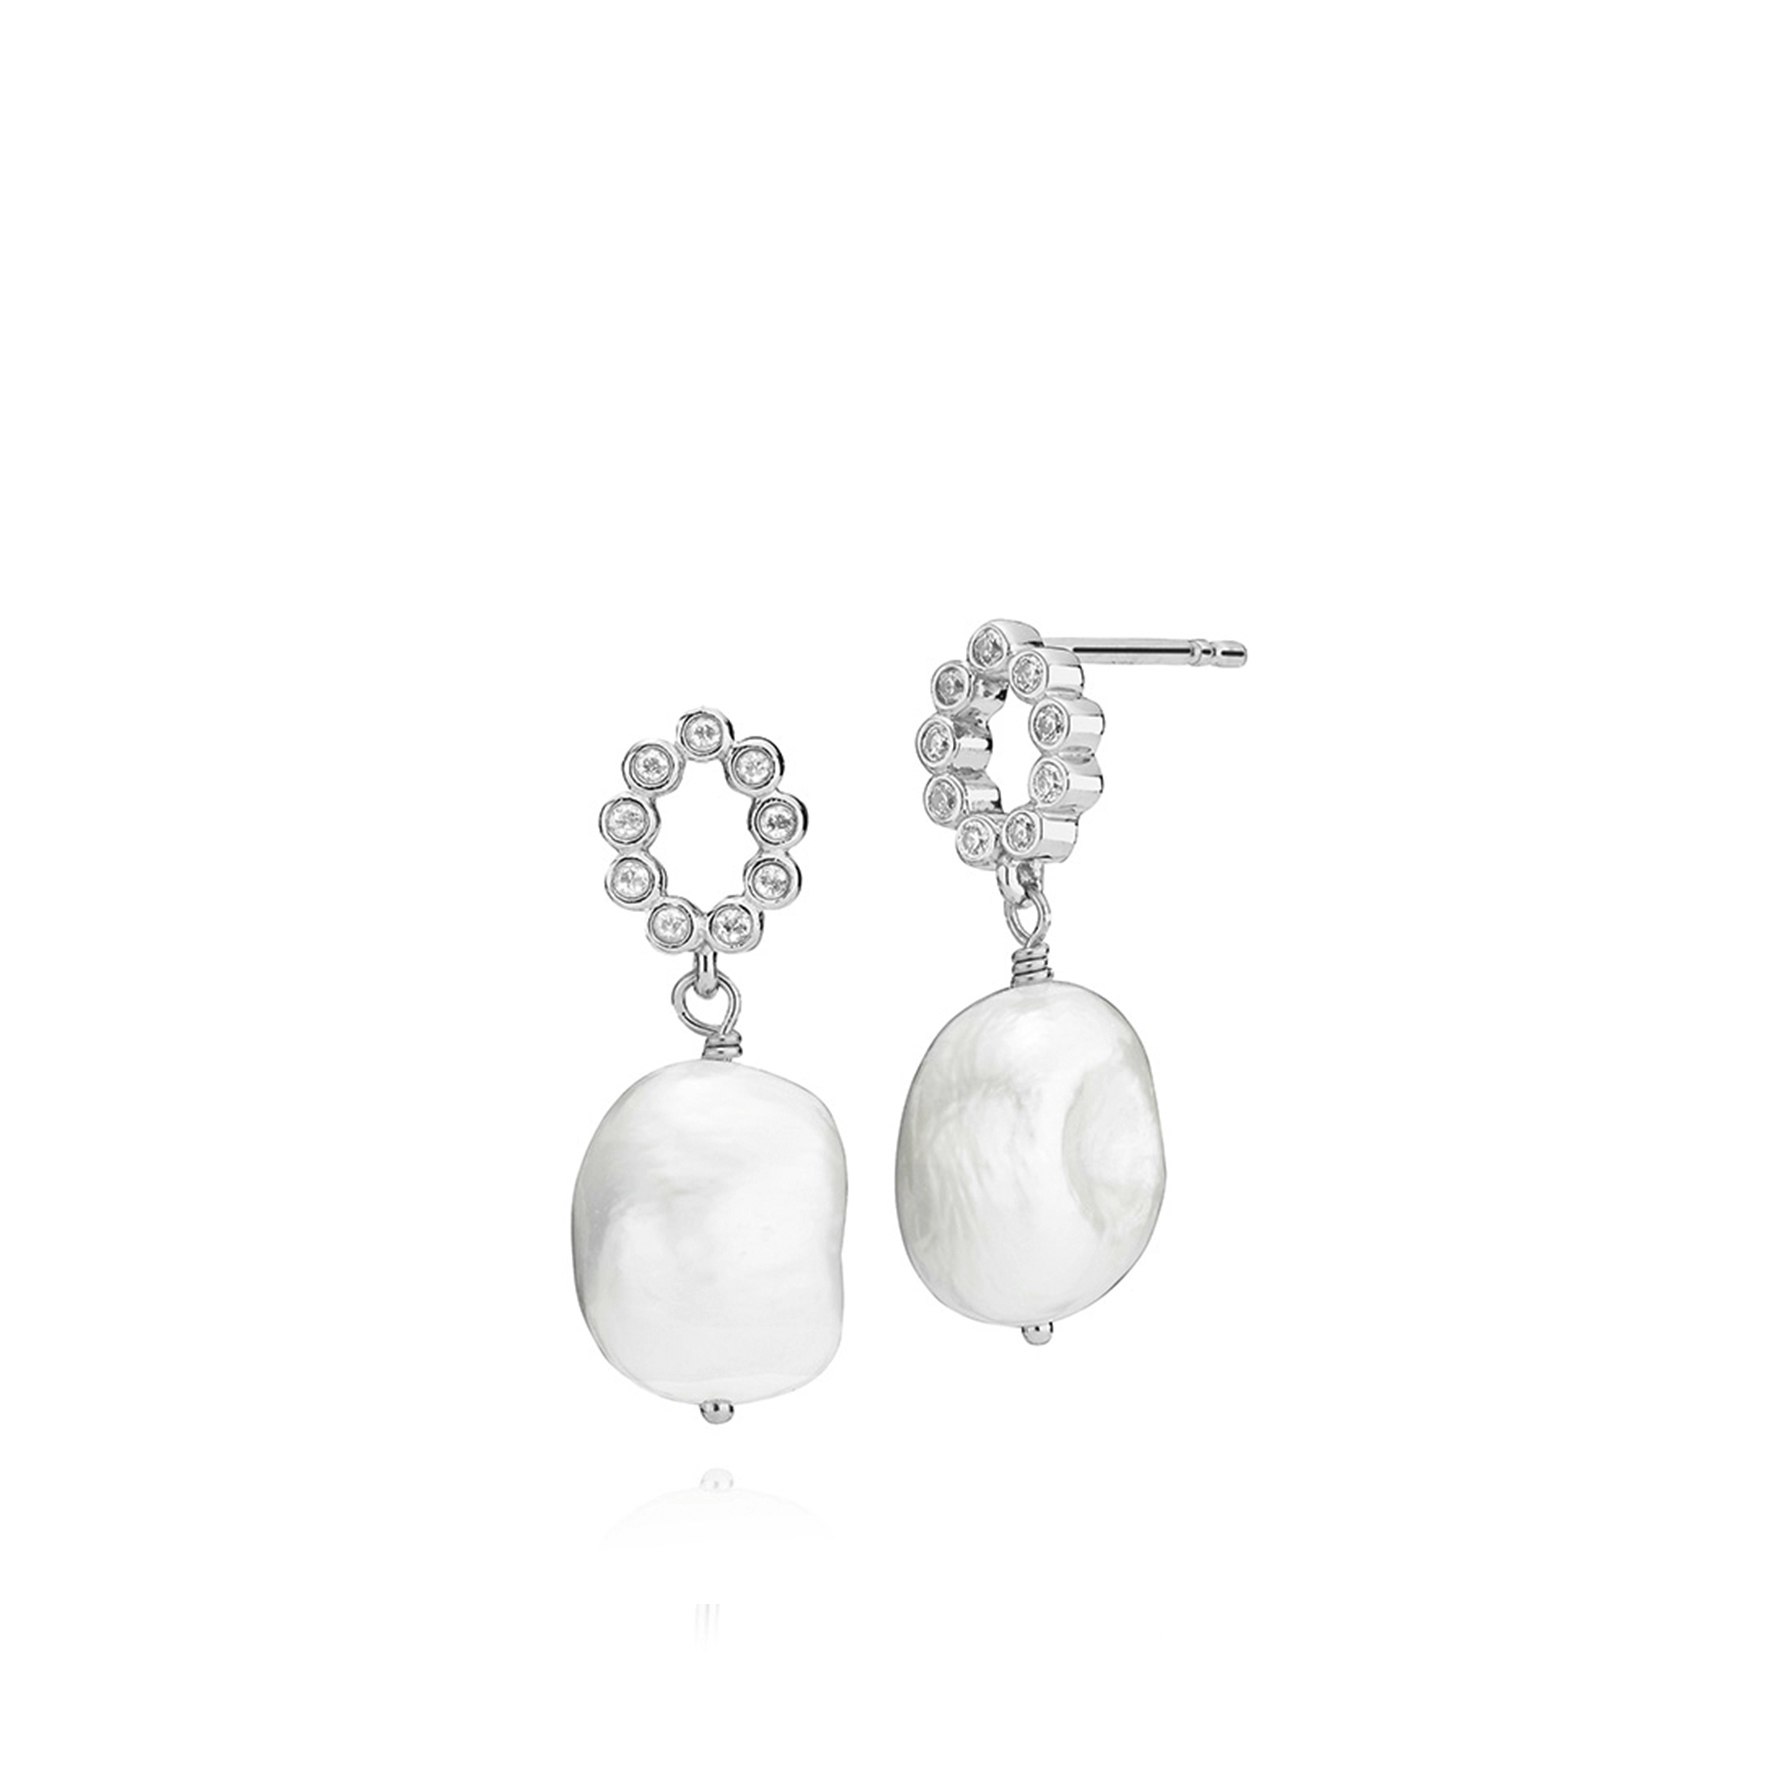 Leonora Earrings With Freshwater Pearls from Izabel Camille in Silver Sterling 925